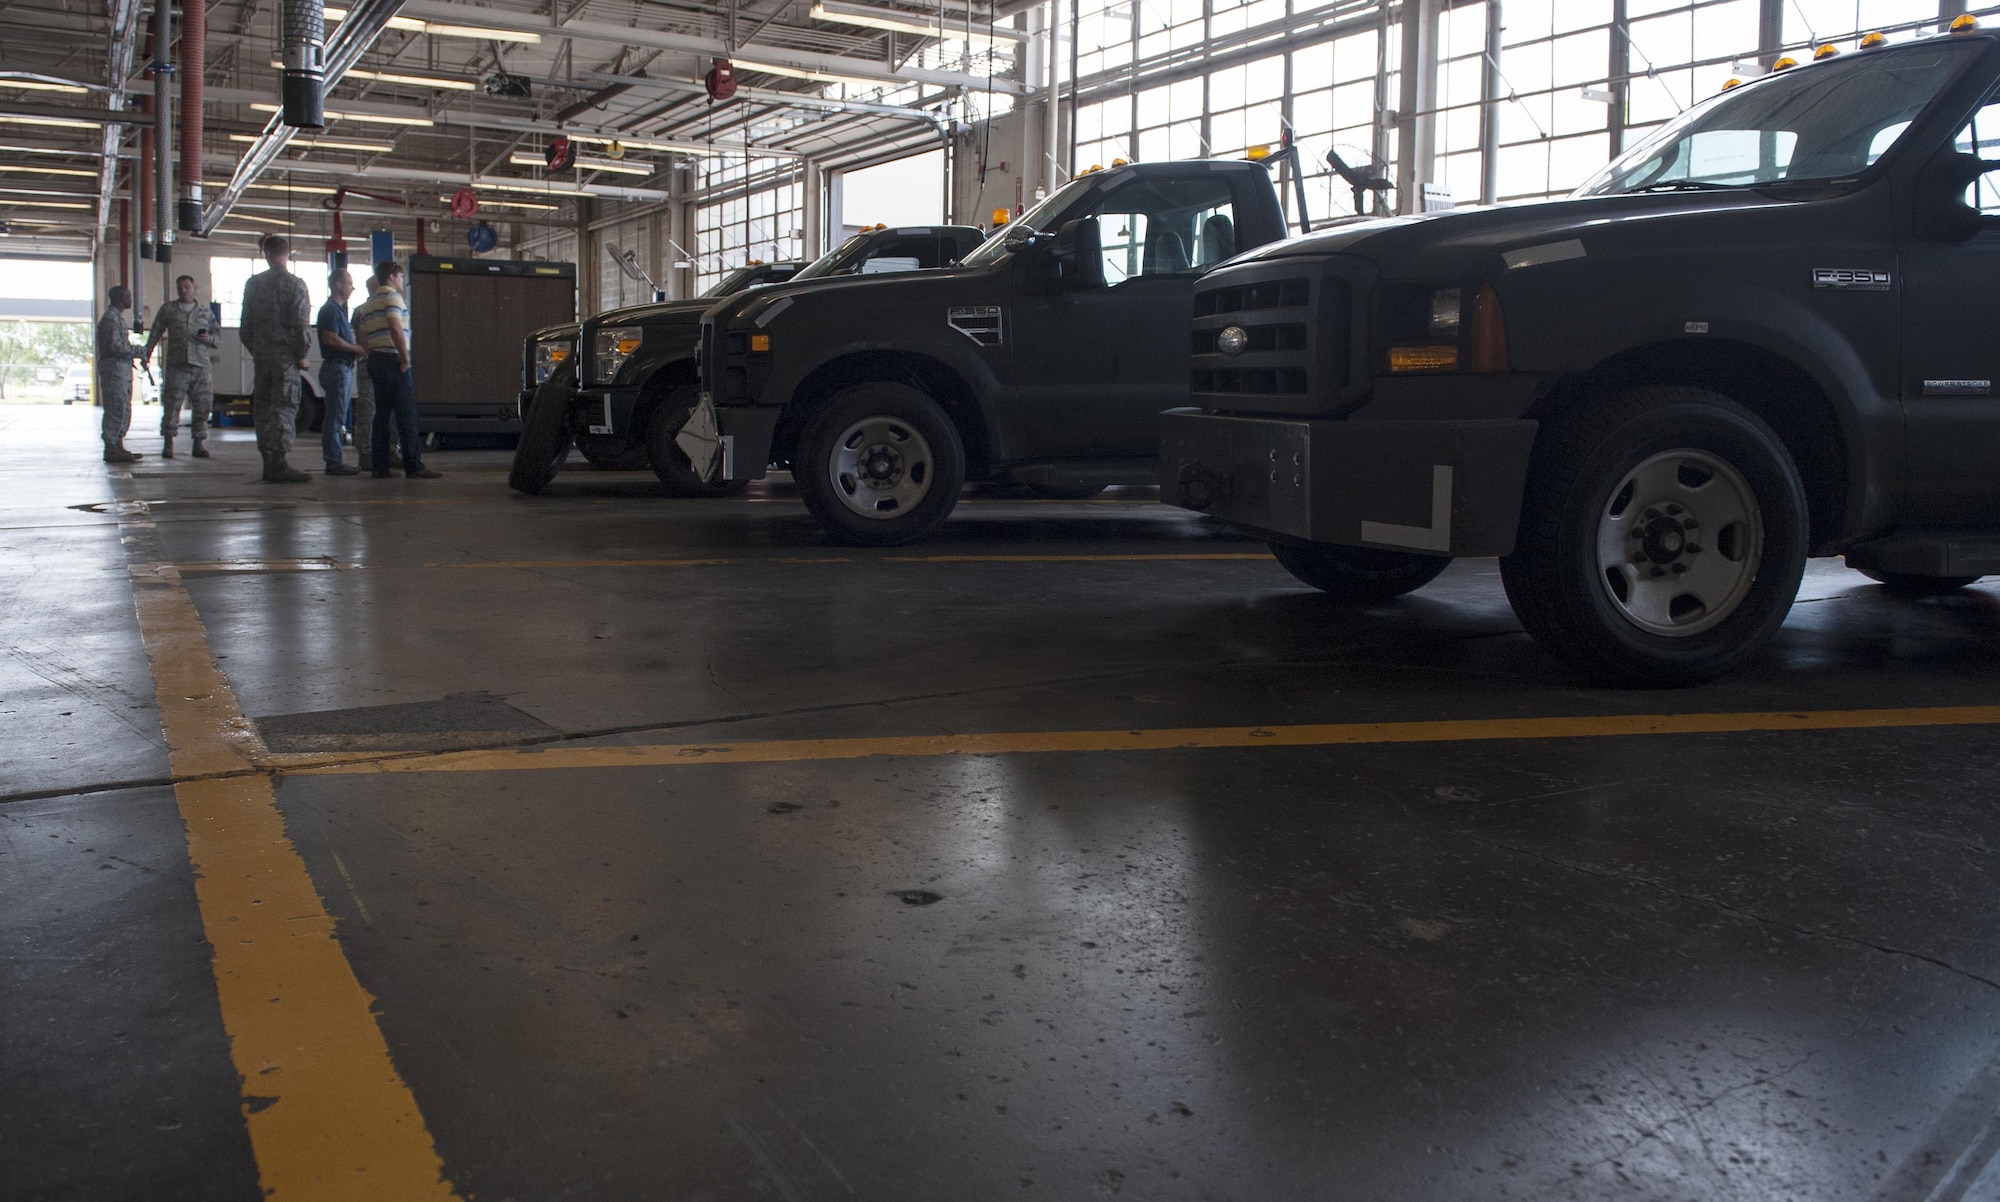 Flightline tow tractors, also known as bobtail vehicles, await inspection from Robins Air Force Base engineers at Dyess AFB, Texas, June 14, 2017. The engineers examined the difference between the models with and without the new I-beam modification to gain more knowledge of the modification to begin the approval and funding process. (U.S. Air Force photo by Airman 1st Class April Lancto)